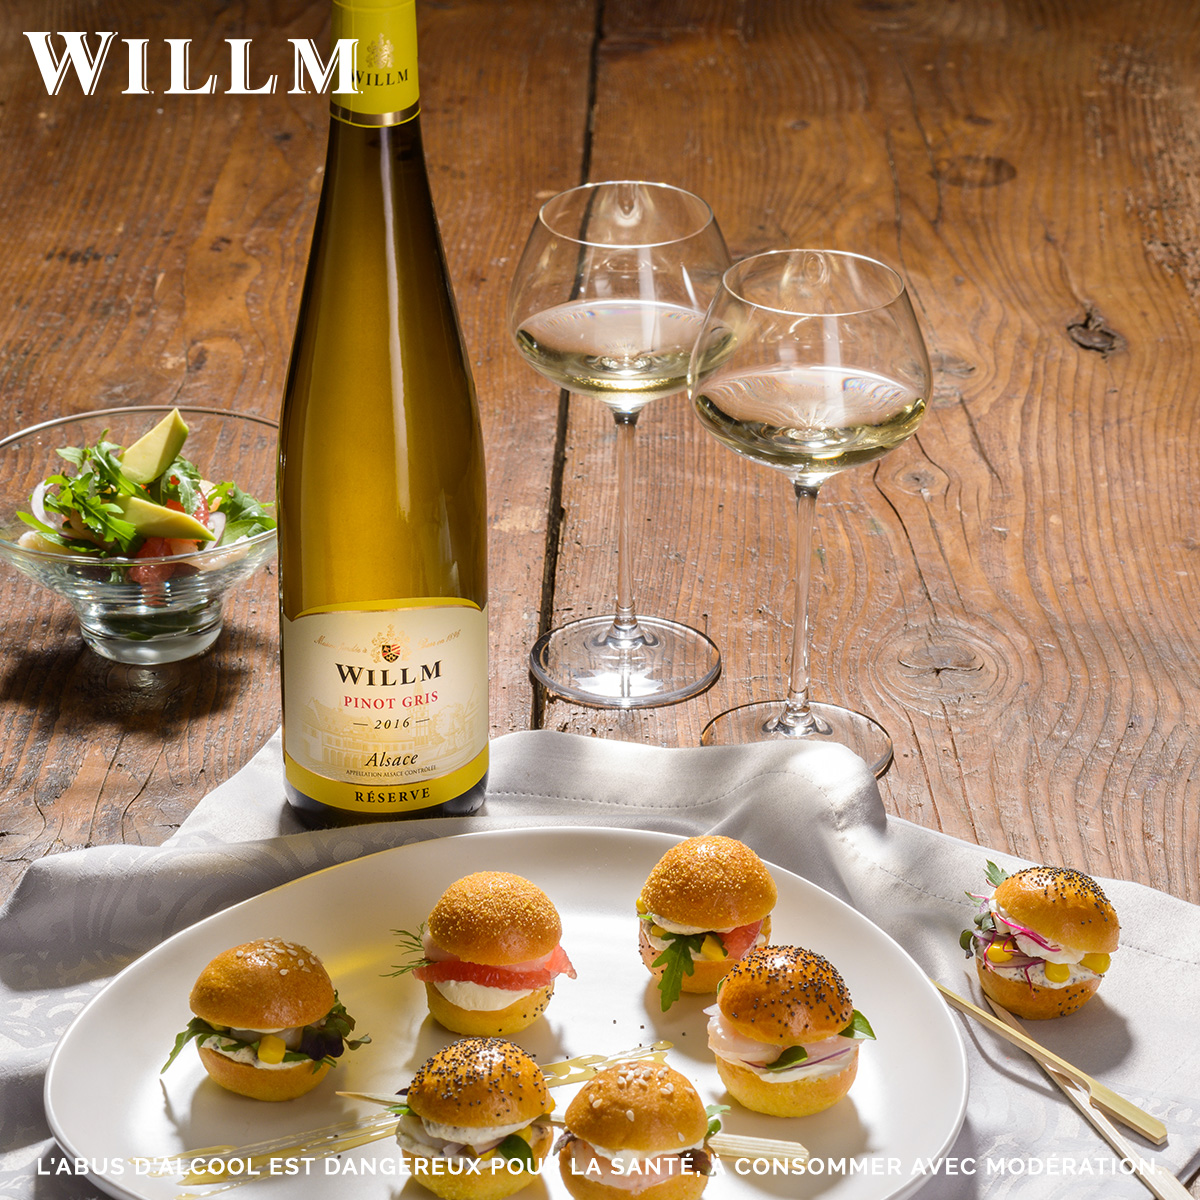 Looking for #aperitif ideas for the weekend? Our Pinot Gris Reserve is the perfect wine to accompany almost any nibbles and pairs especially well with salmon, tuna, rocket…